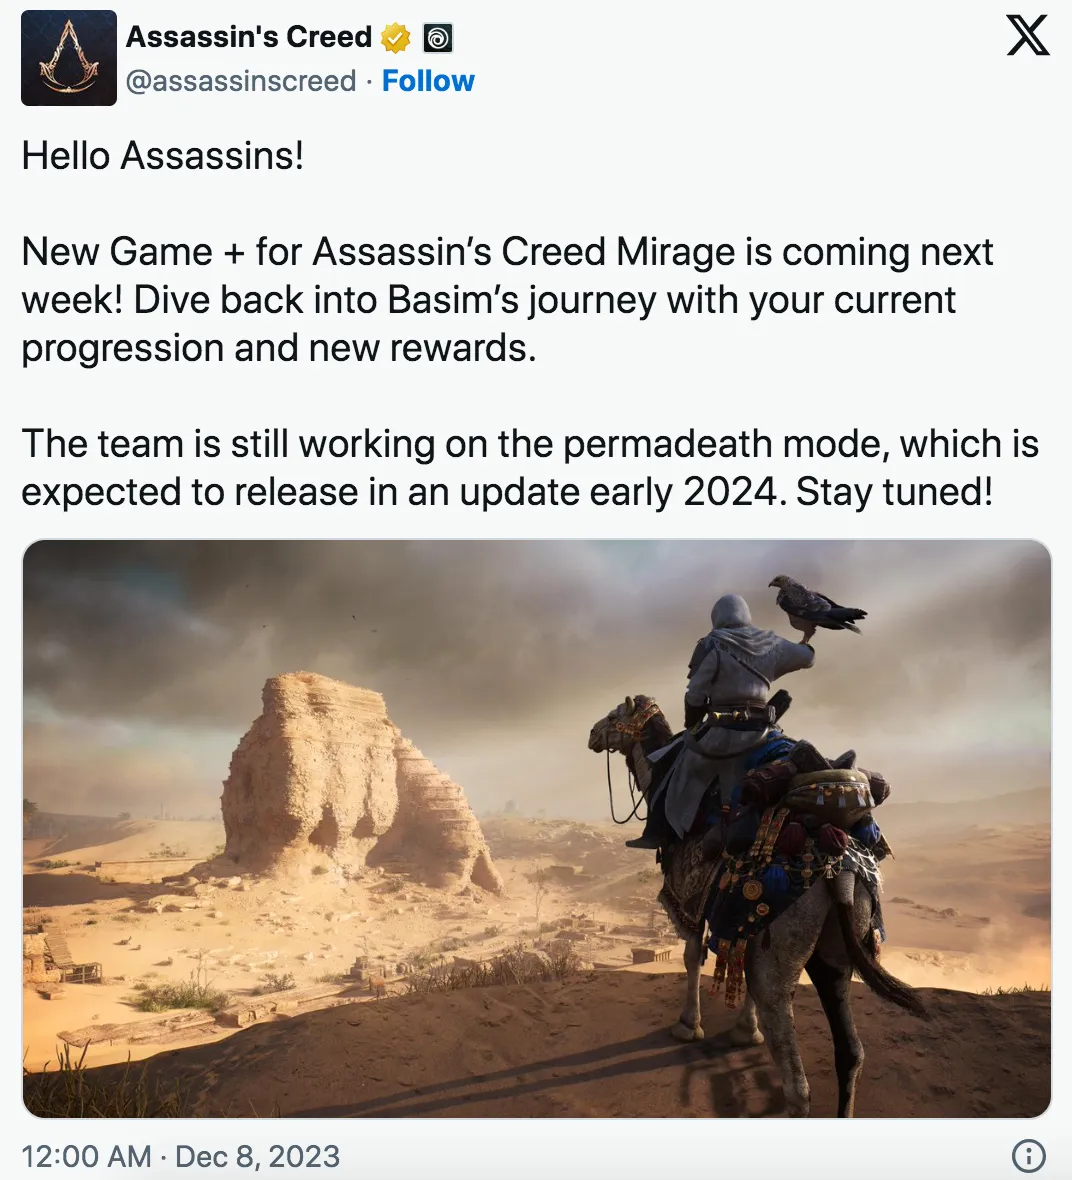 What is the next Assassin's Creed game 2024?